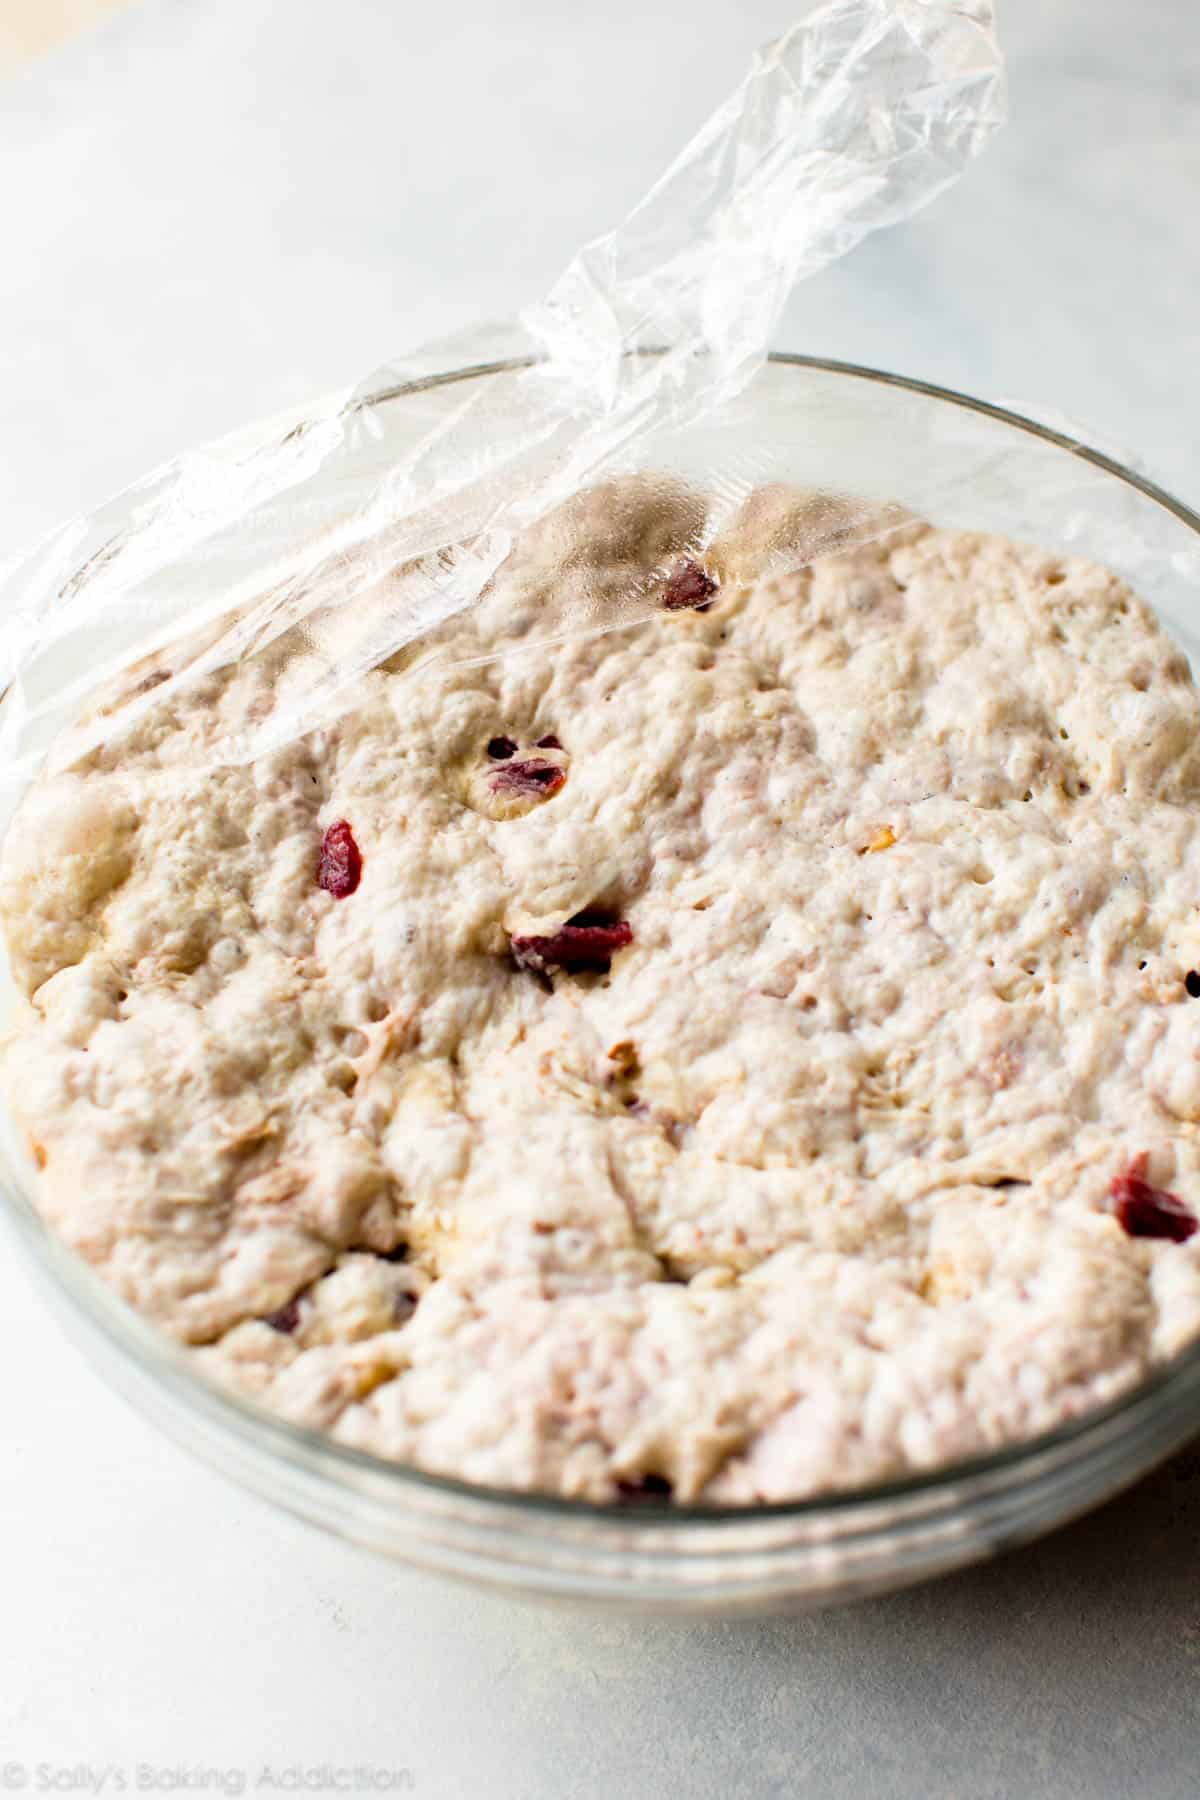 cranberry nut dough in a glass bowl after rising